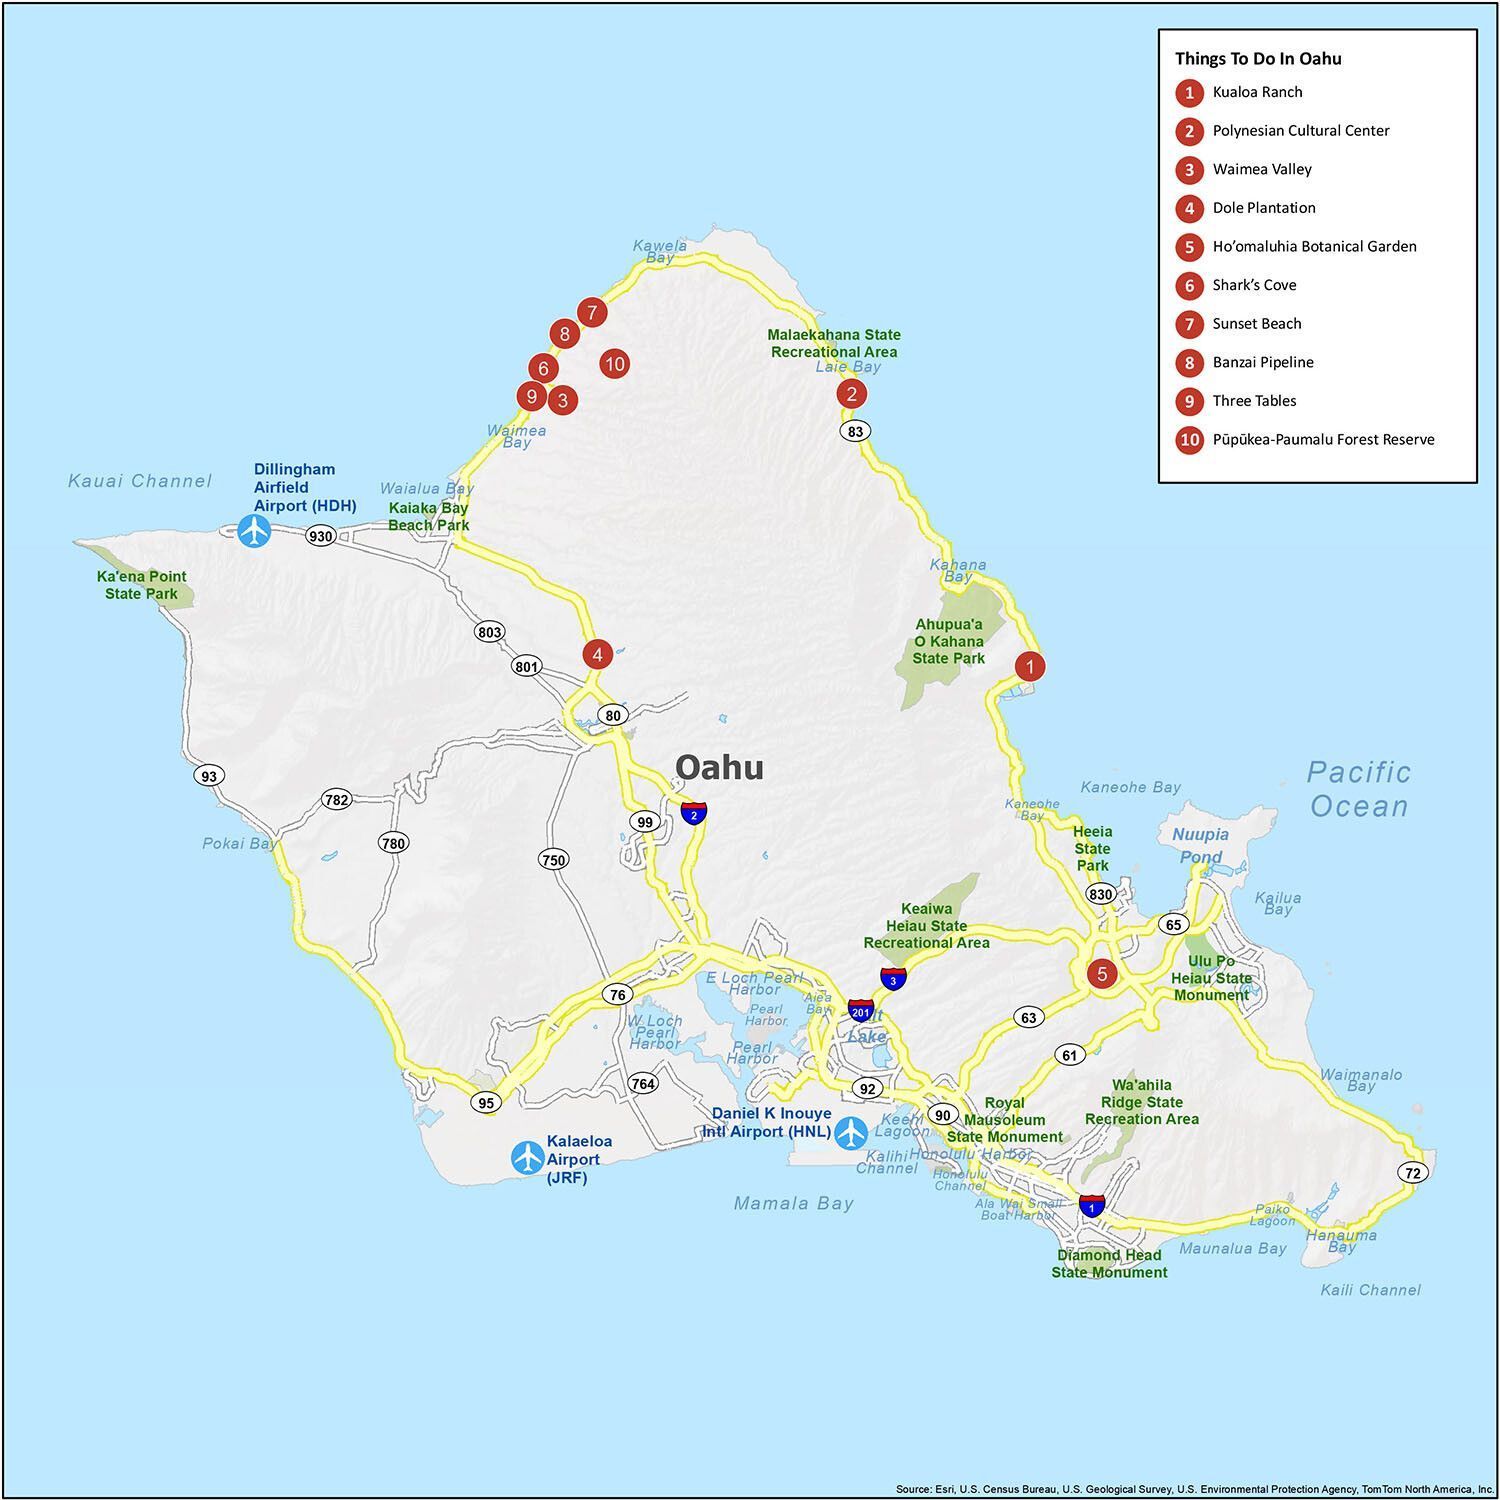 campground-map